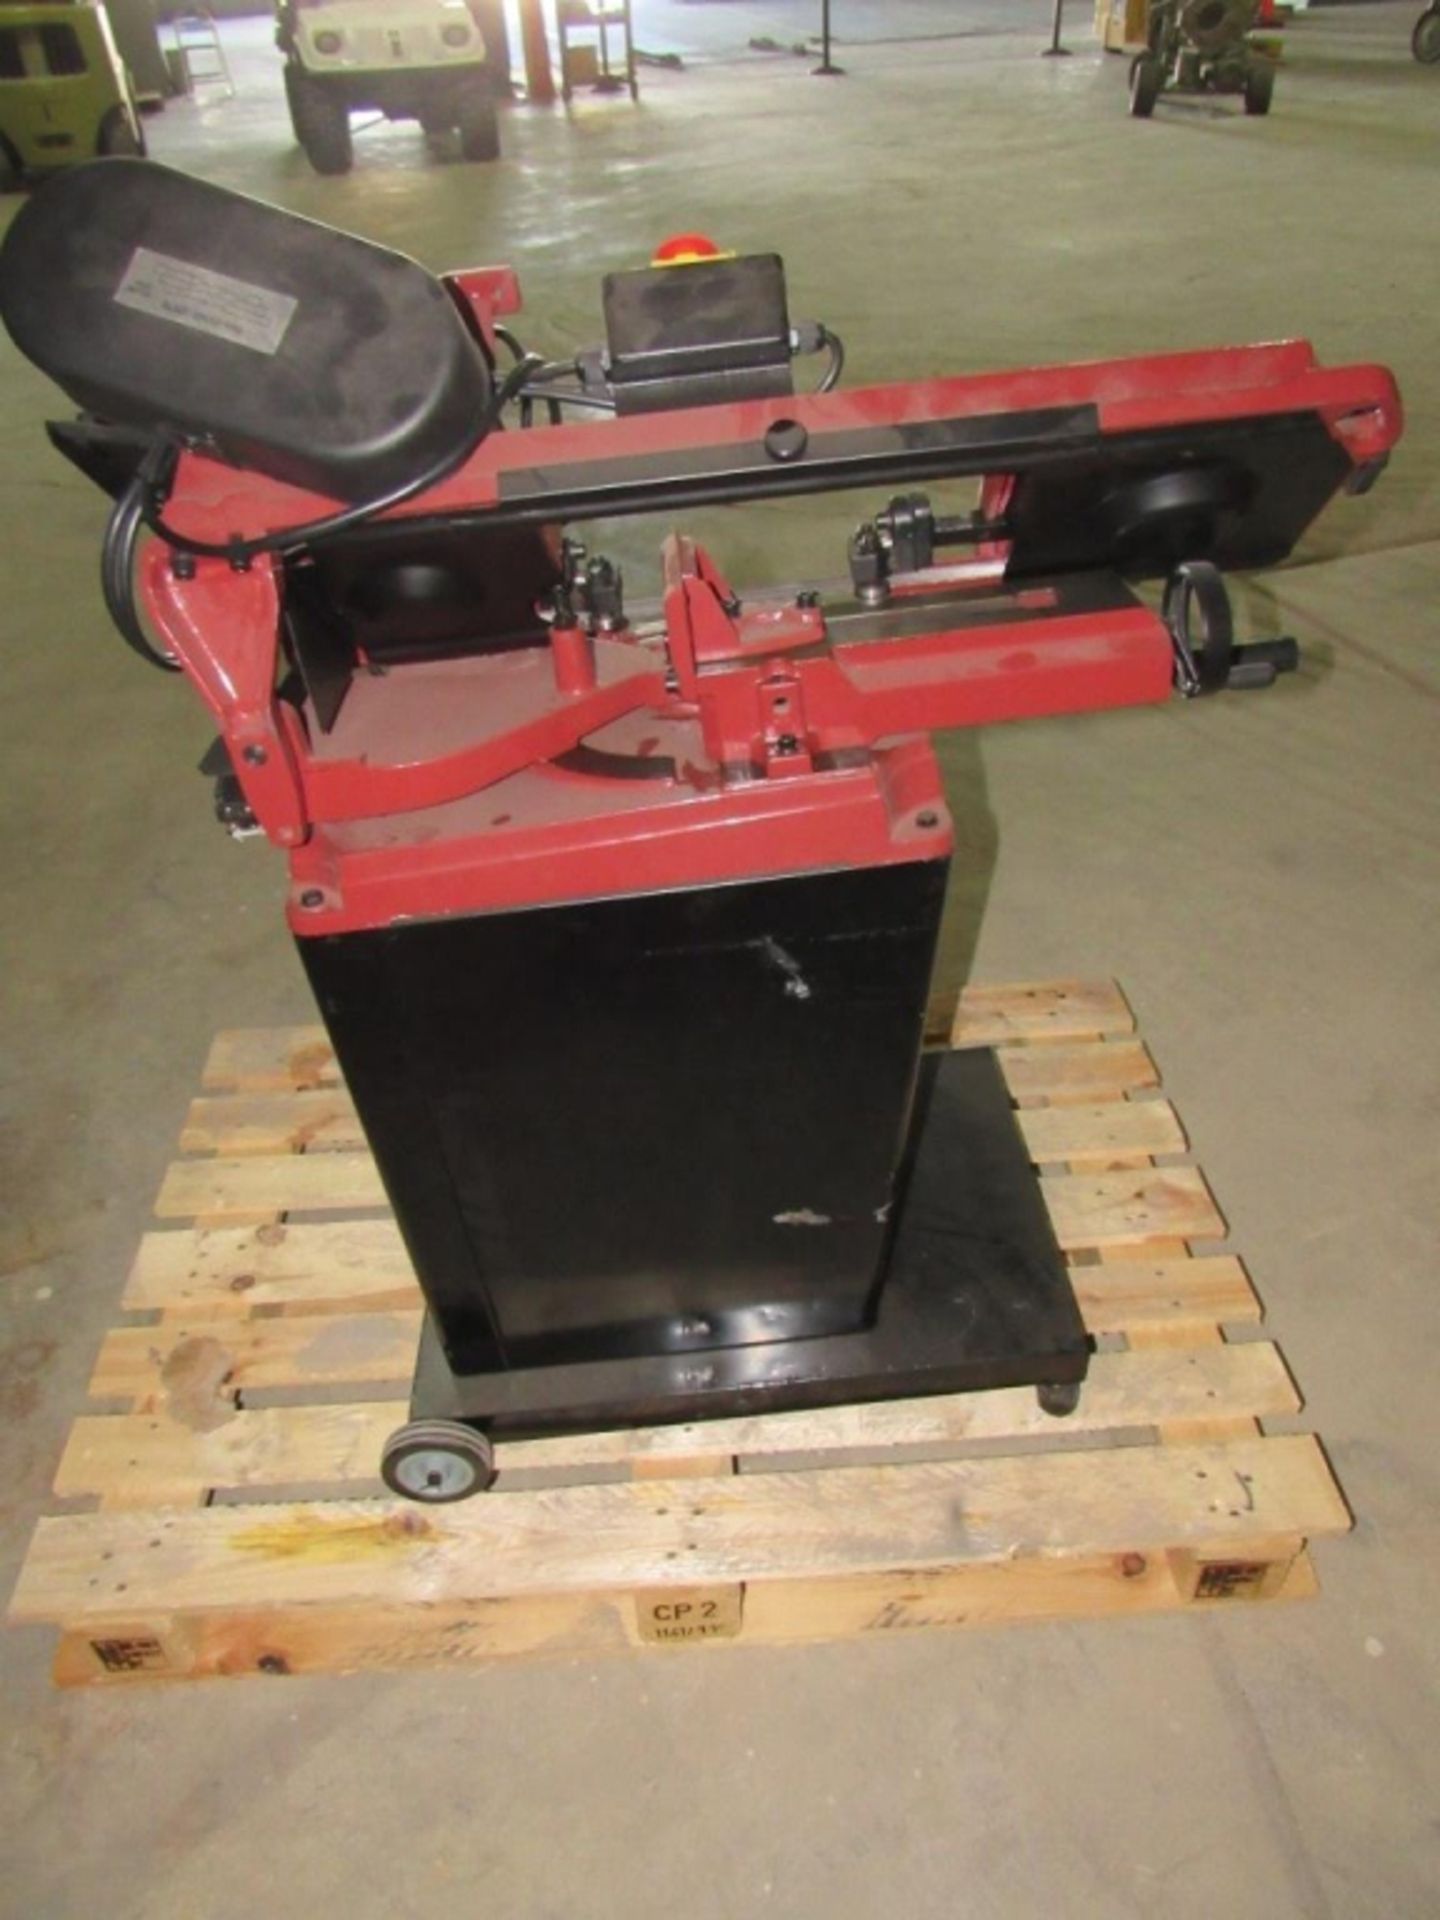 Metal Band Saw- Model - BS-128HDR 0.37 Kw 115 Volts 1 Phase 60 Hz Overall Dimensions - 3' x 20" x - Image 3 of 9